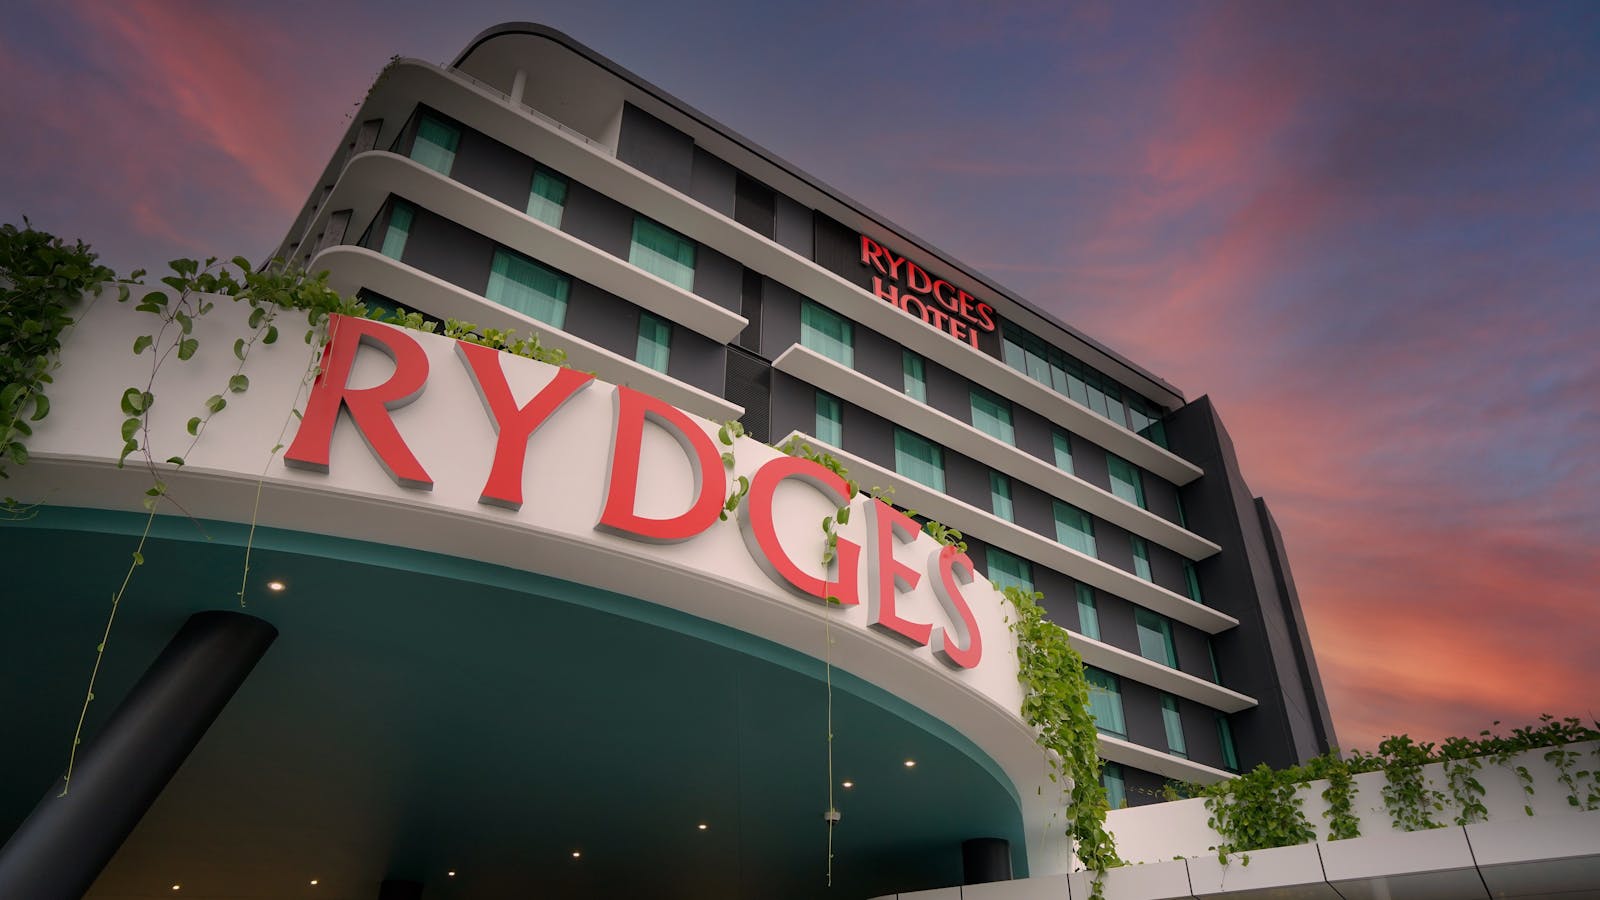 Welcome to Rydges Gold Coast Airport